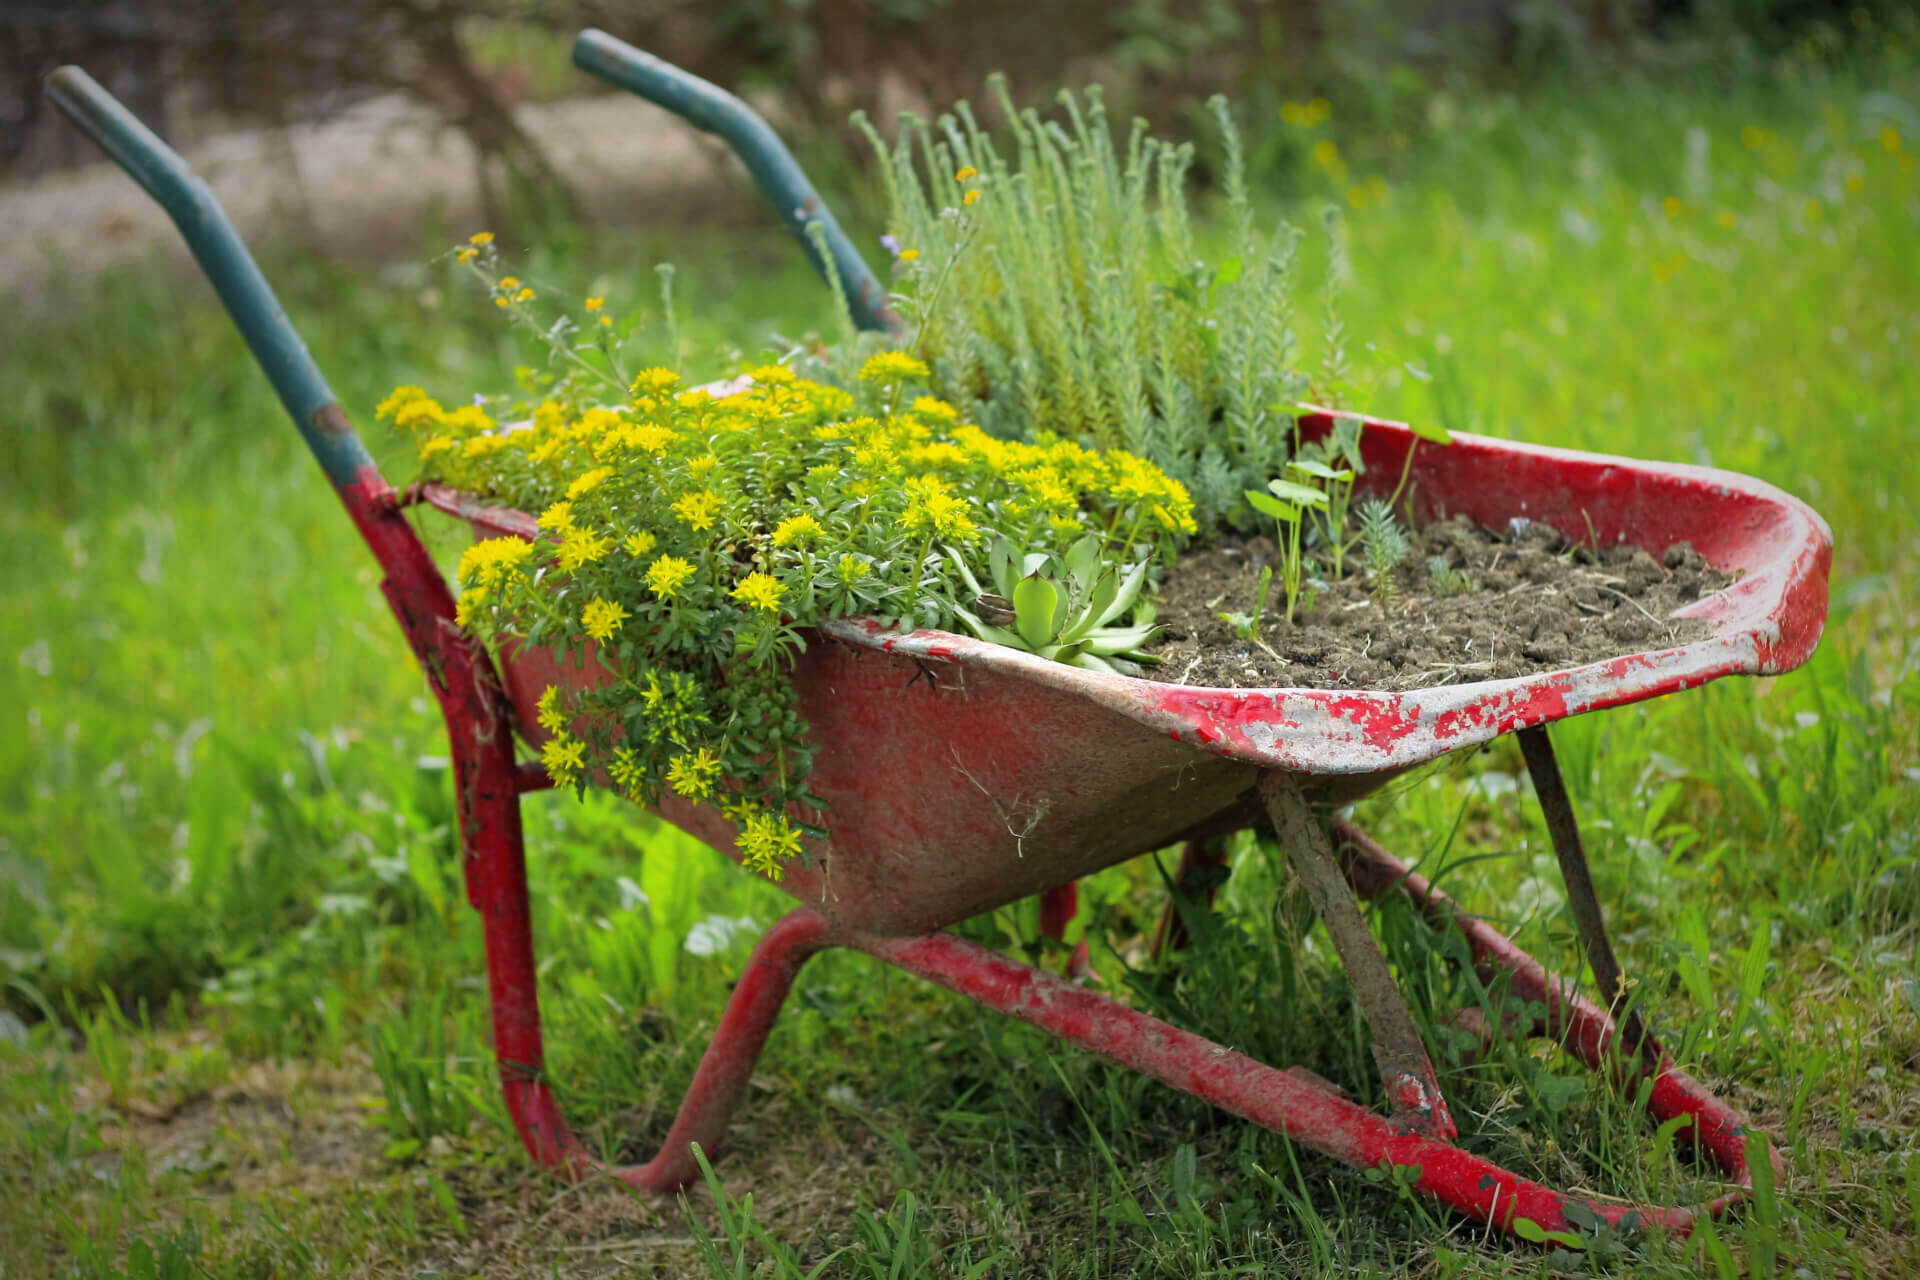 Are weeds actually unwanted?